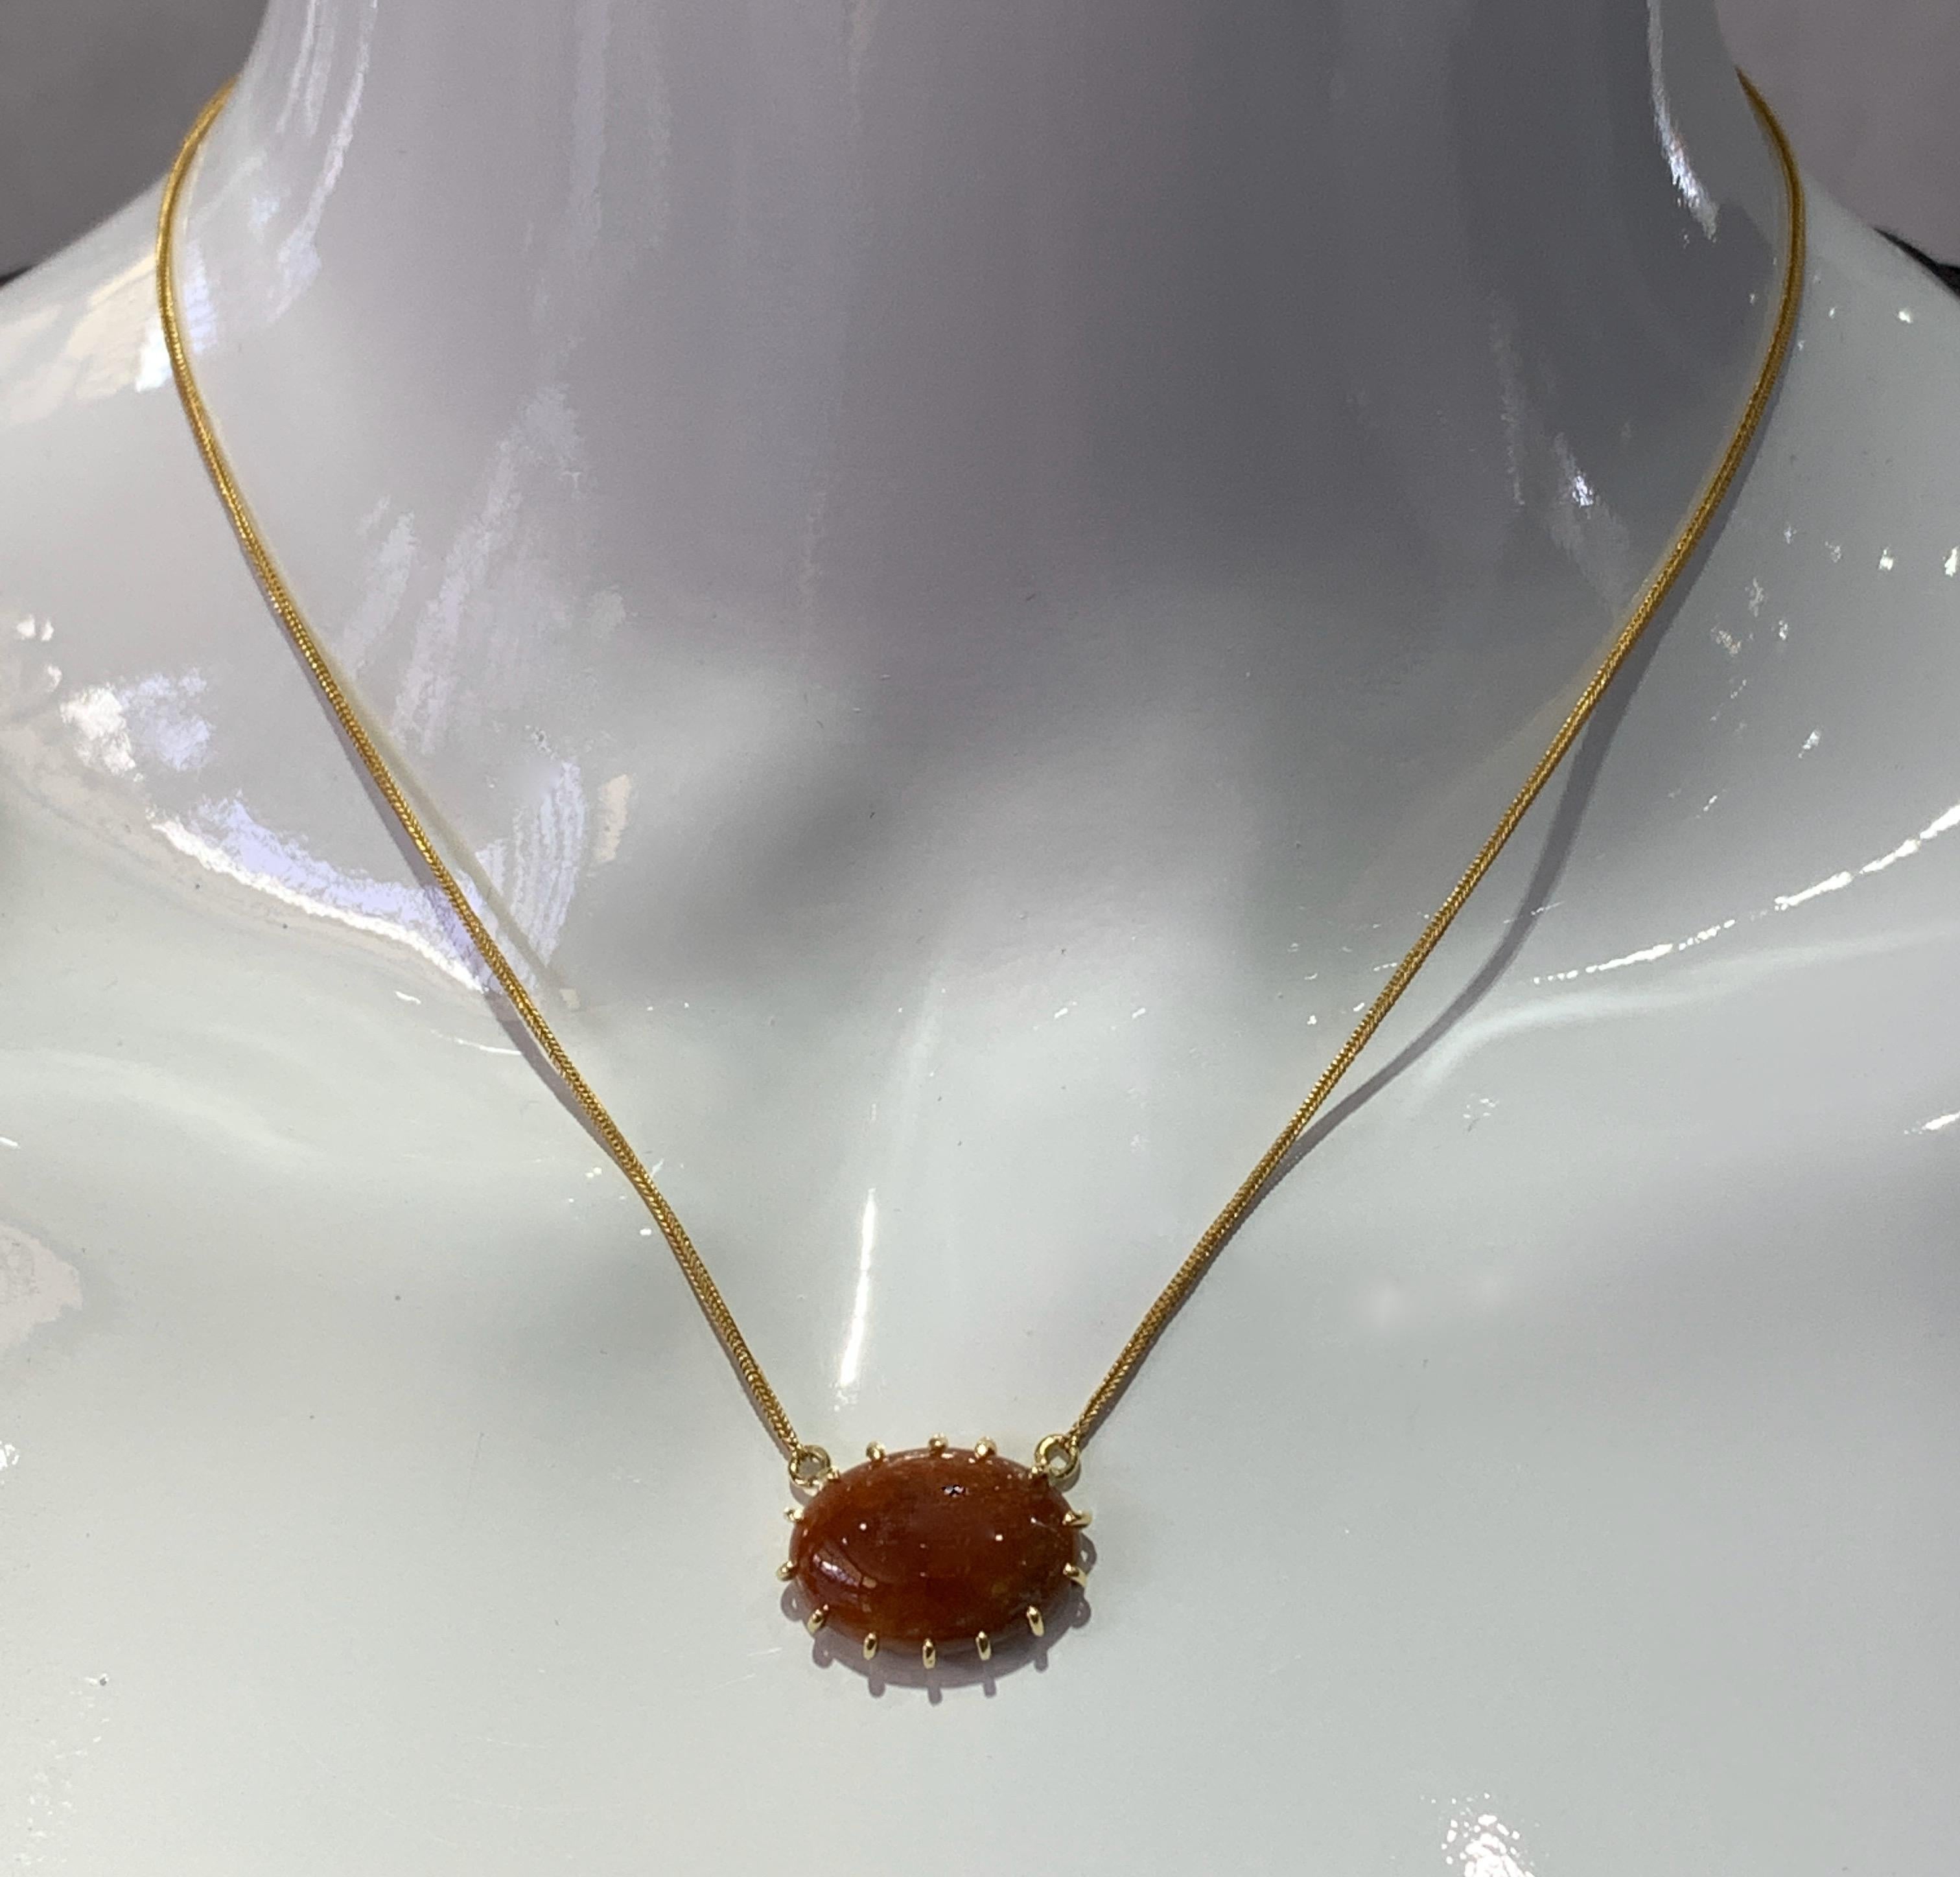 This sexy, slinky one-of-a-kind little pendant, handmade here in our shop by Eytan Brandes, features a smooth 18x13 cabochon of nicely mottled reddish-brown jadeite.  Instead of a bezel, the stone is held in place by fourteen prominent teeth -- a